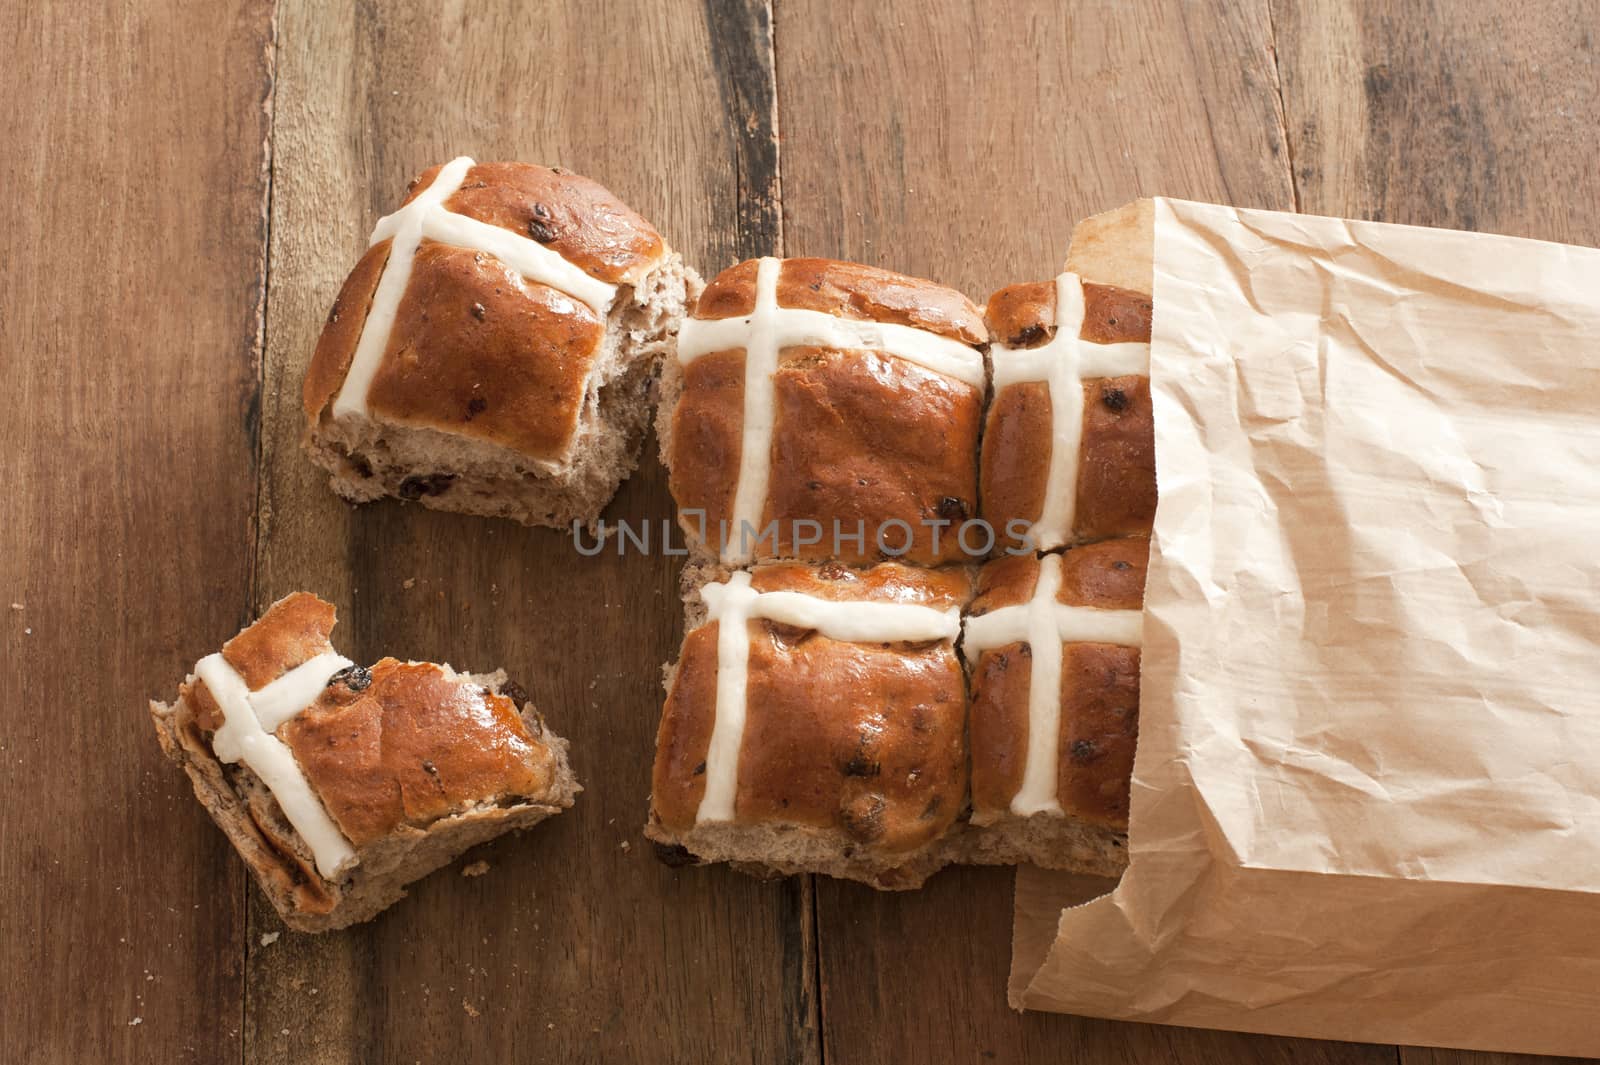 Fresh square hot cross buns sticking out of paper bag